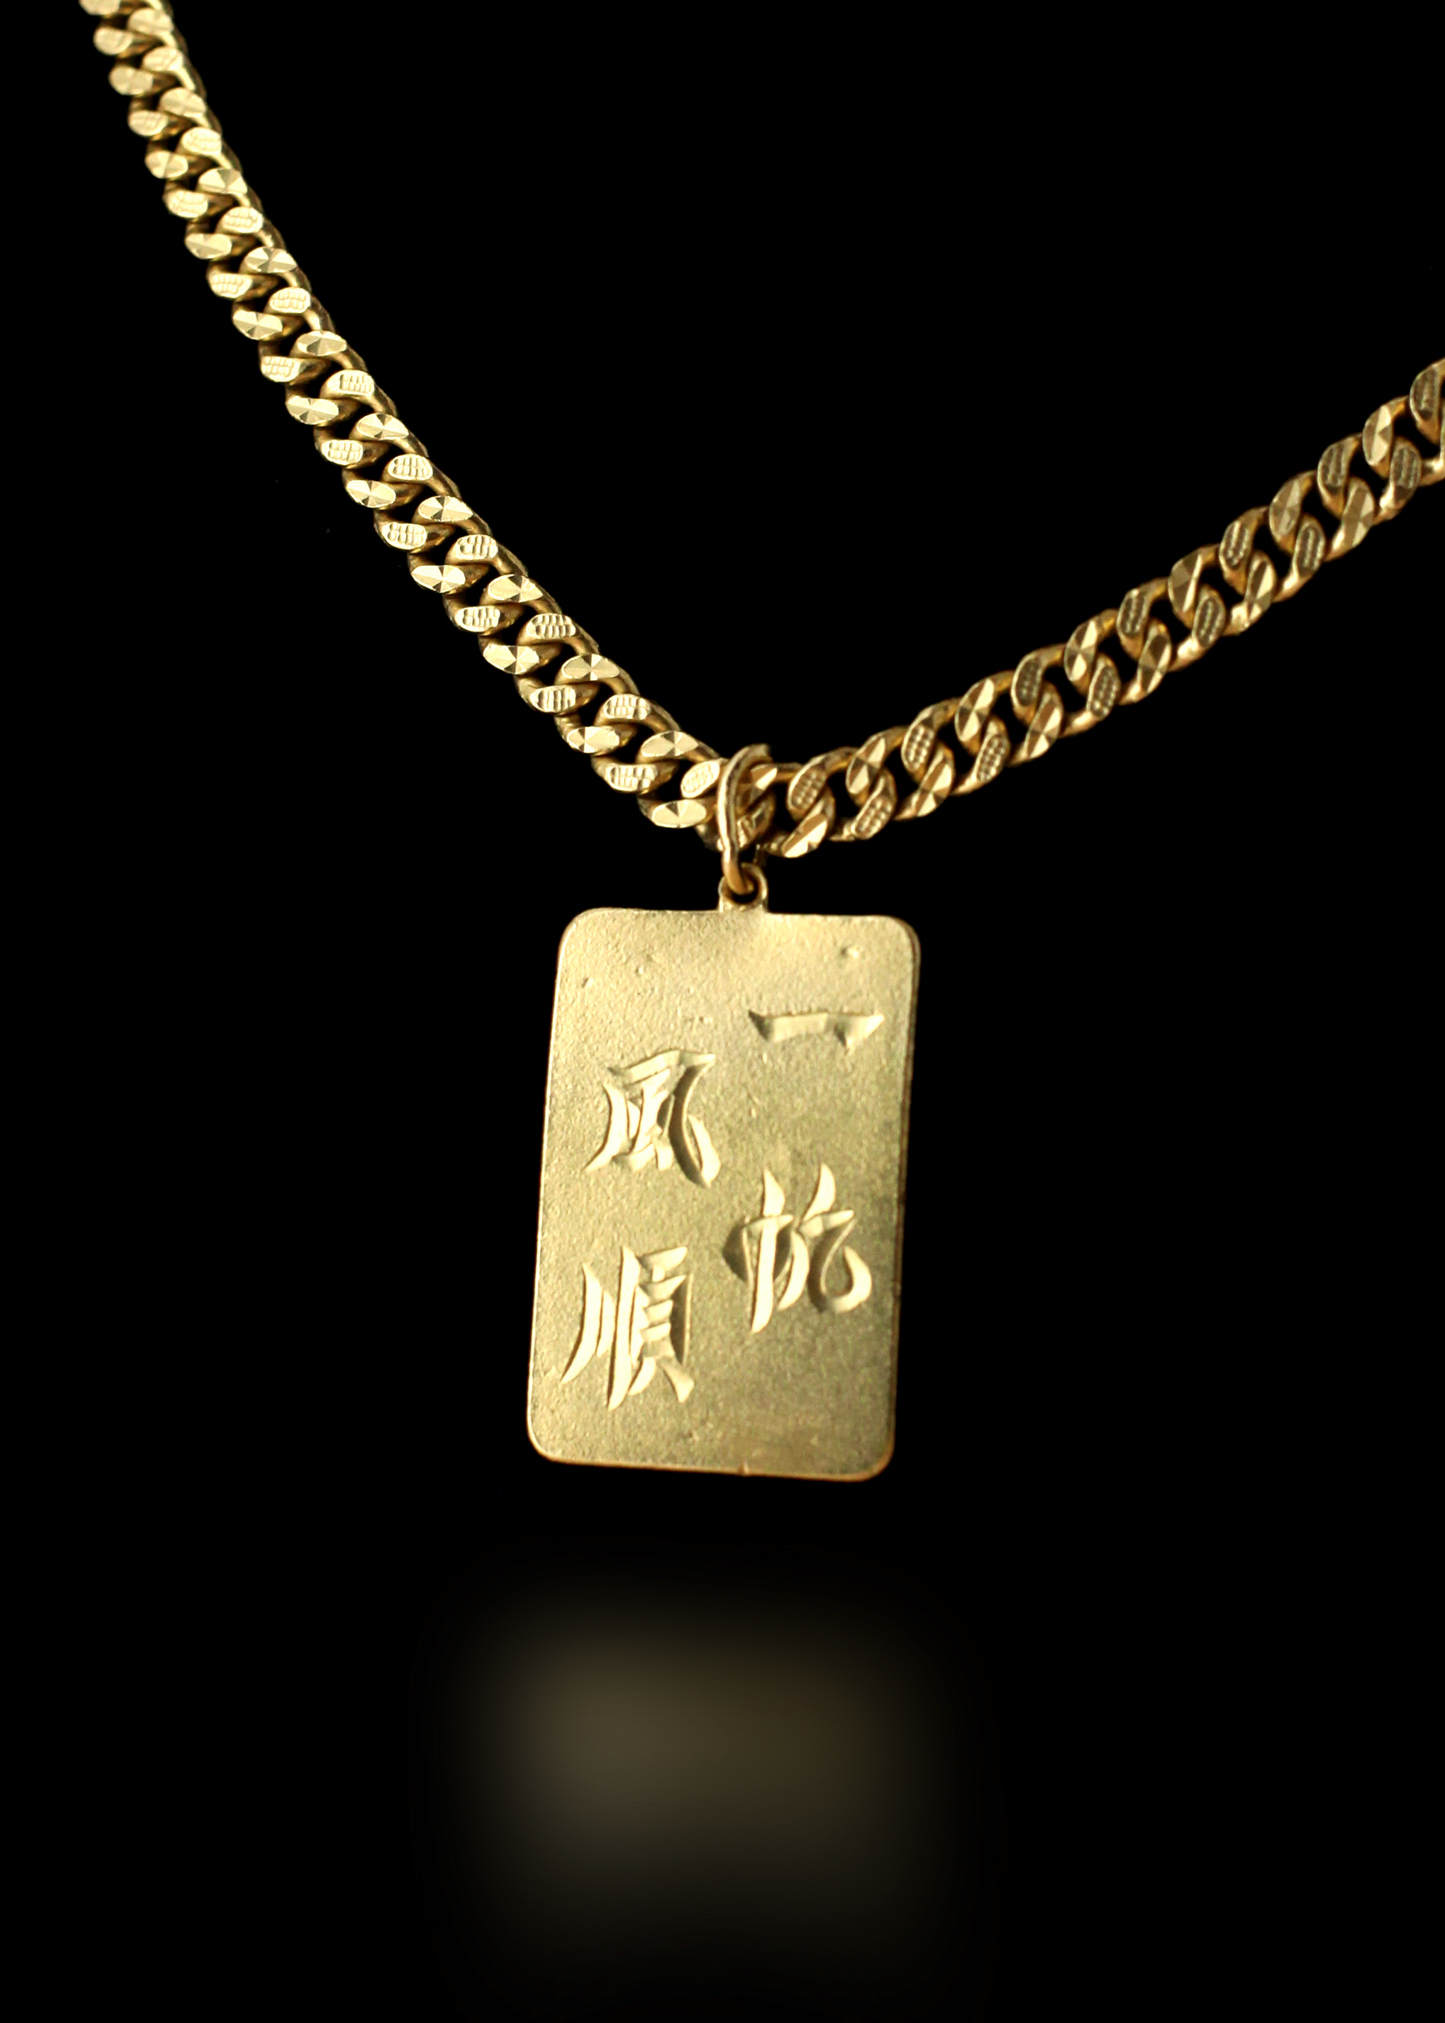 24kt Chinese Link Chain With Good Fortune Pendant